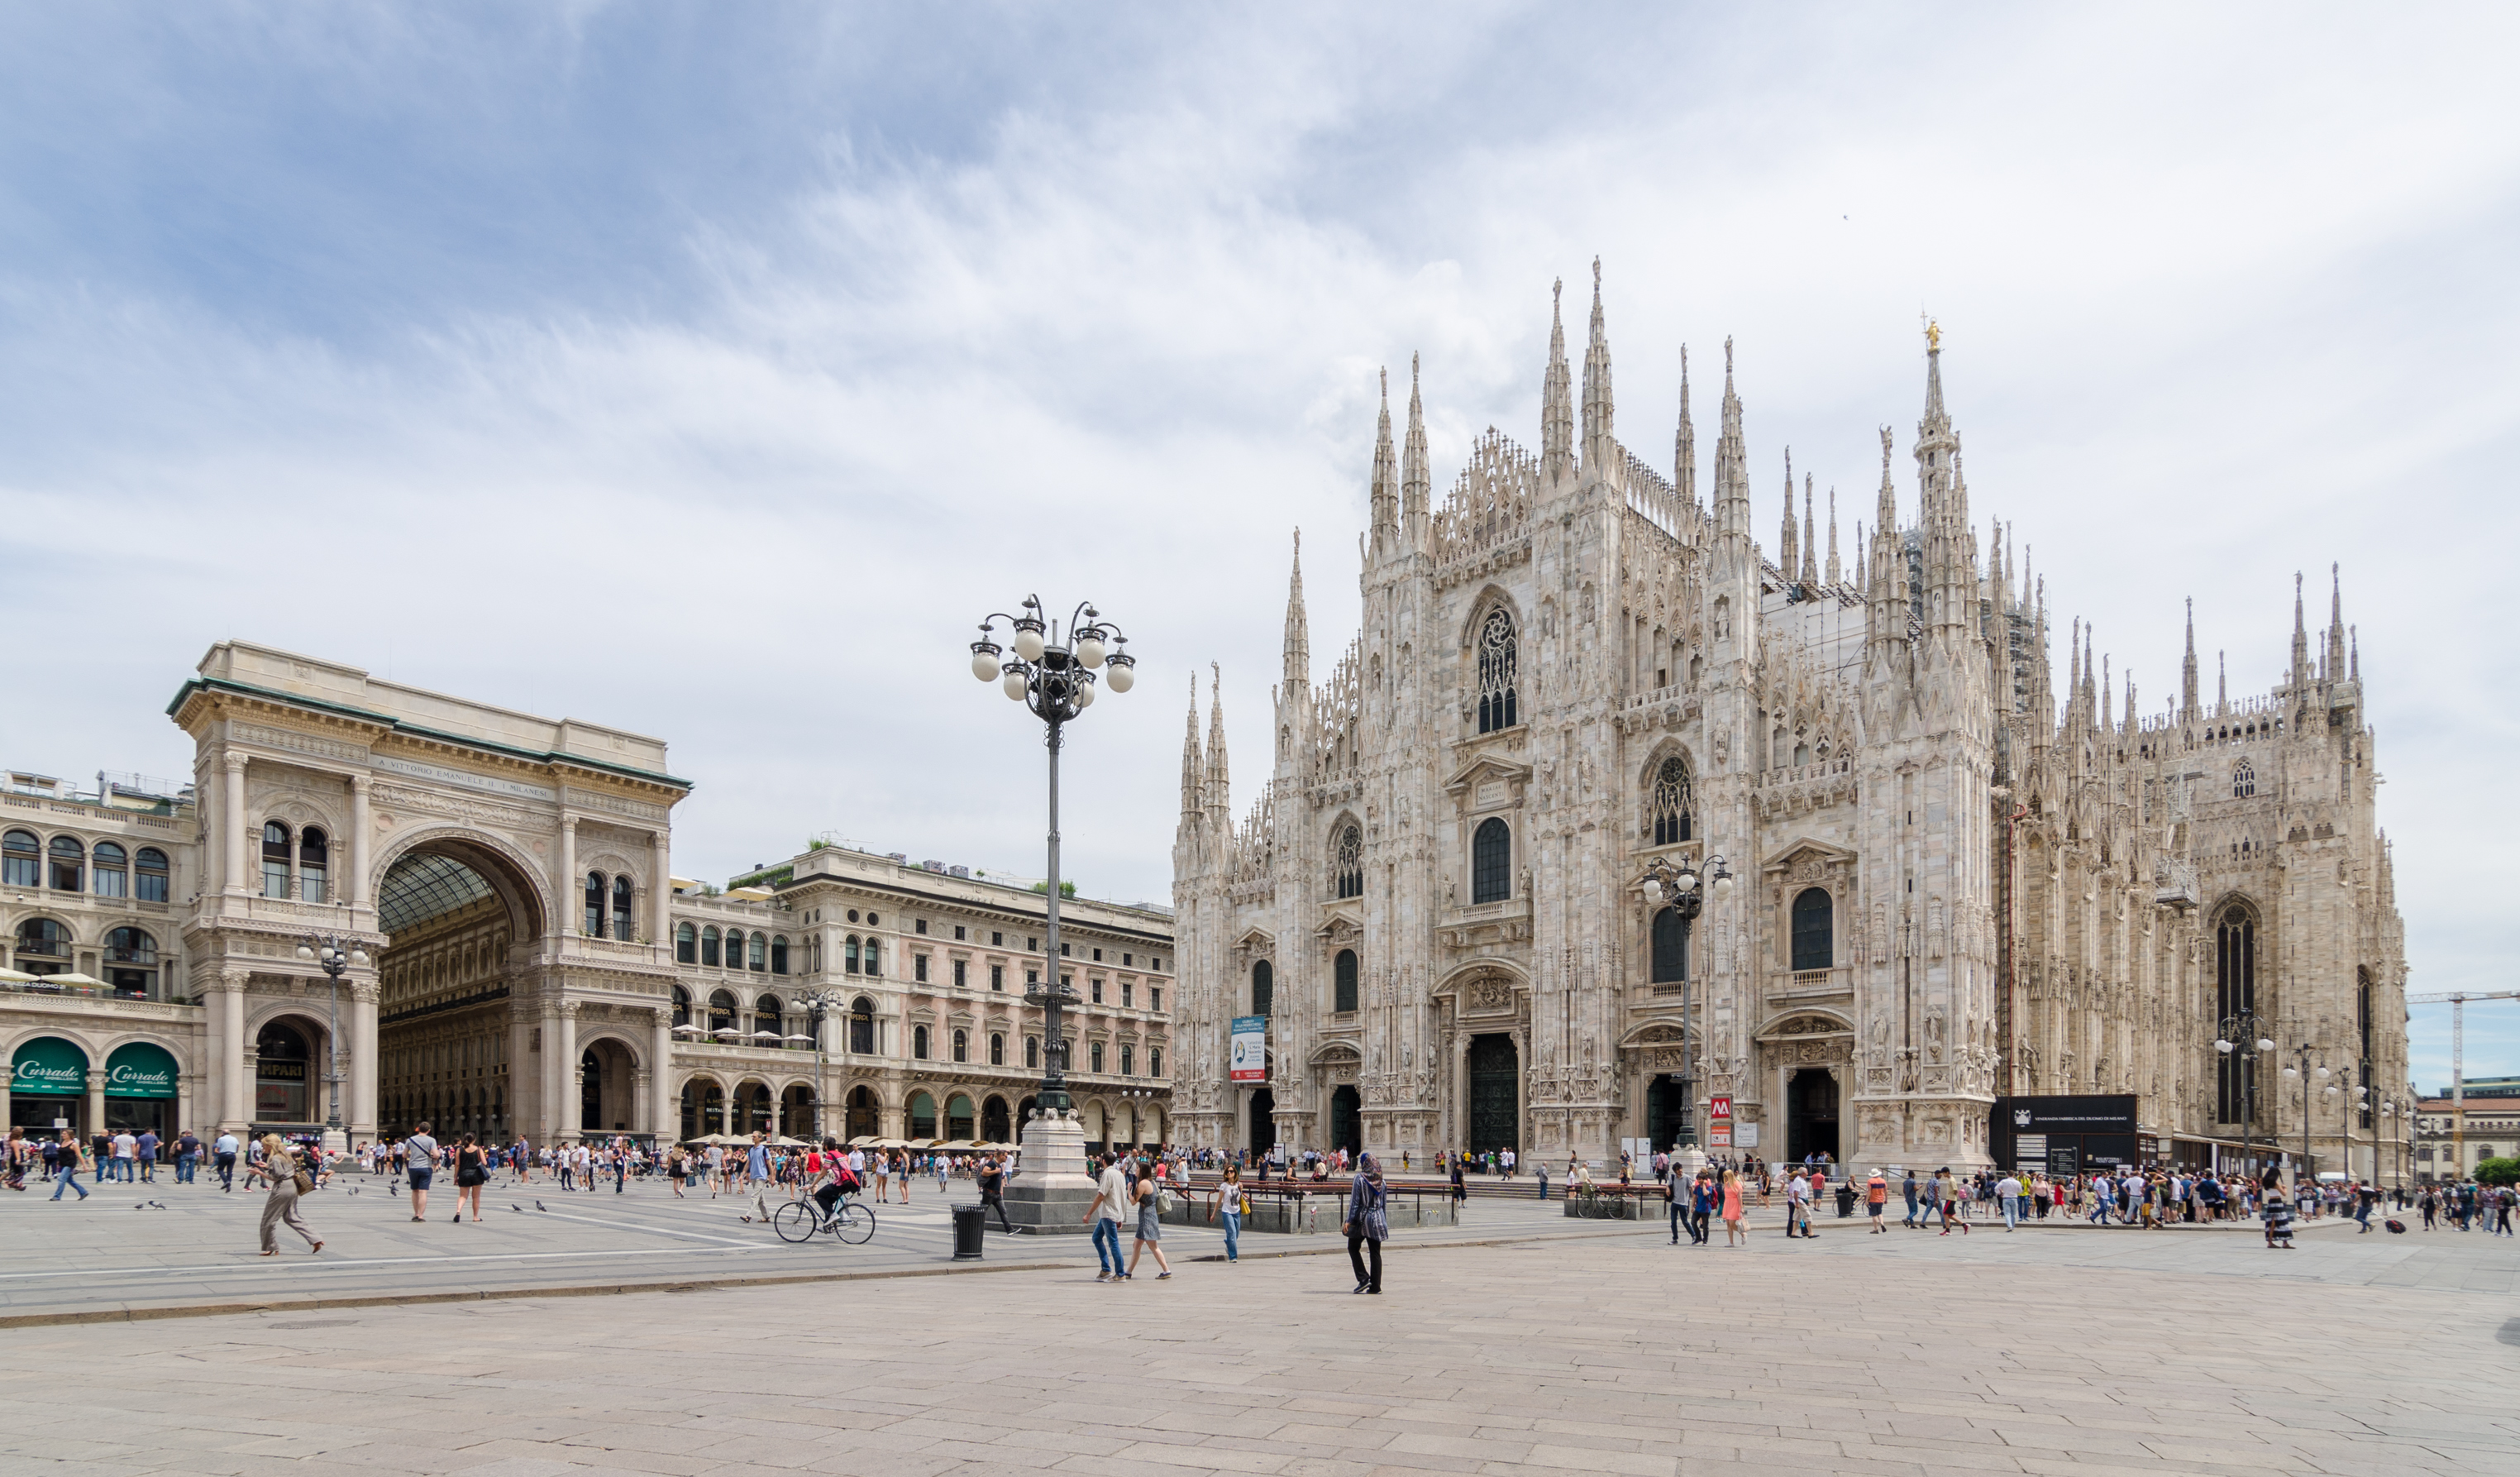 Milano, Duomo with Milan Cathedral and Galleria Vittorio Emanuele II, 2016.jpg